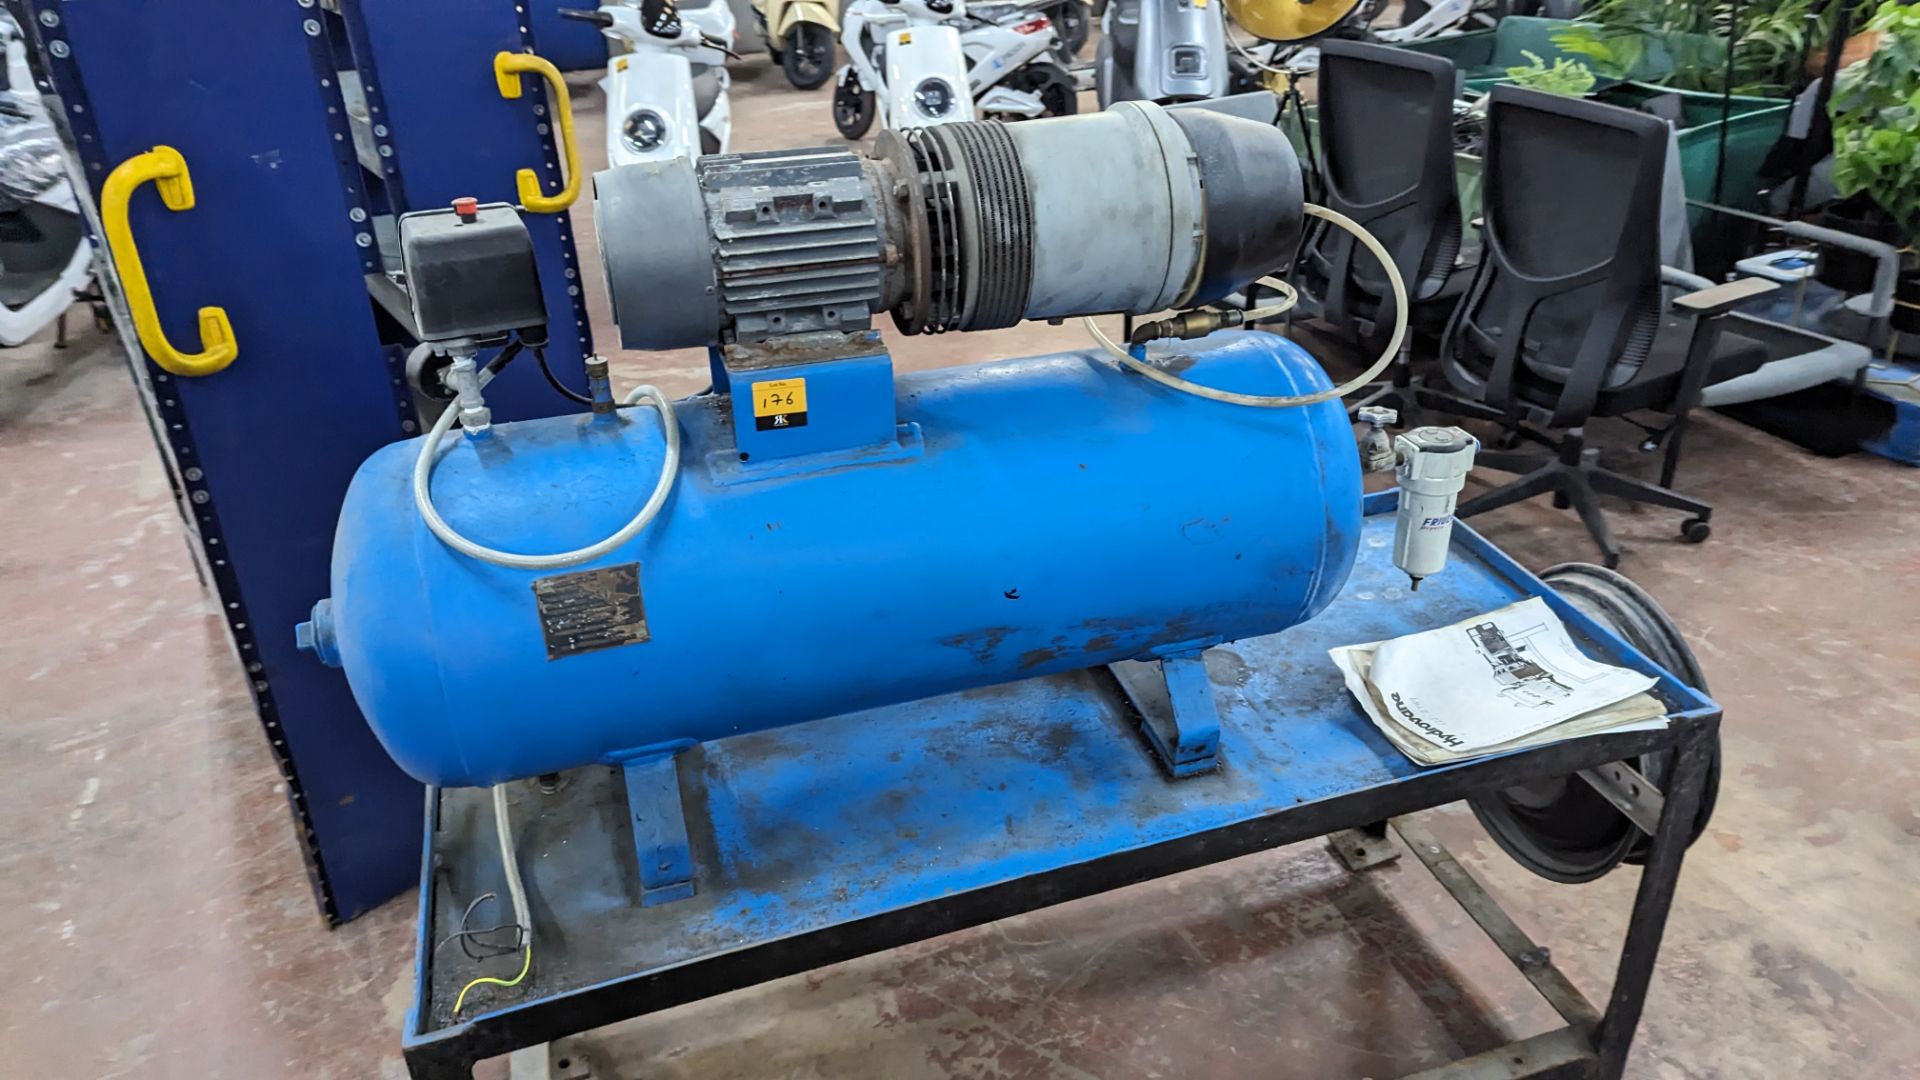 Hydrovane all in one compressor with welded horizontal air receiver, mounted on heavy duty metal tab - Image 6 of 11